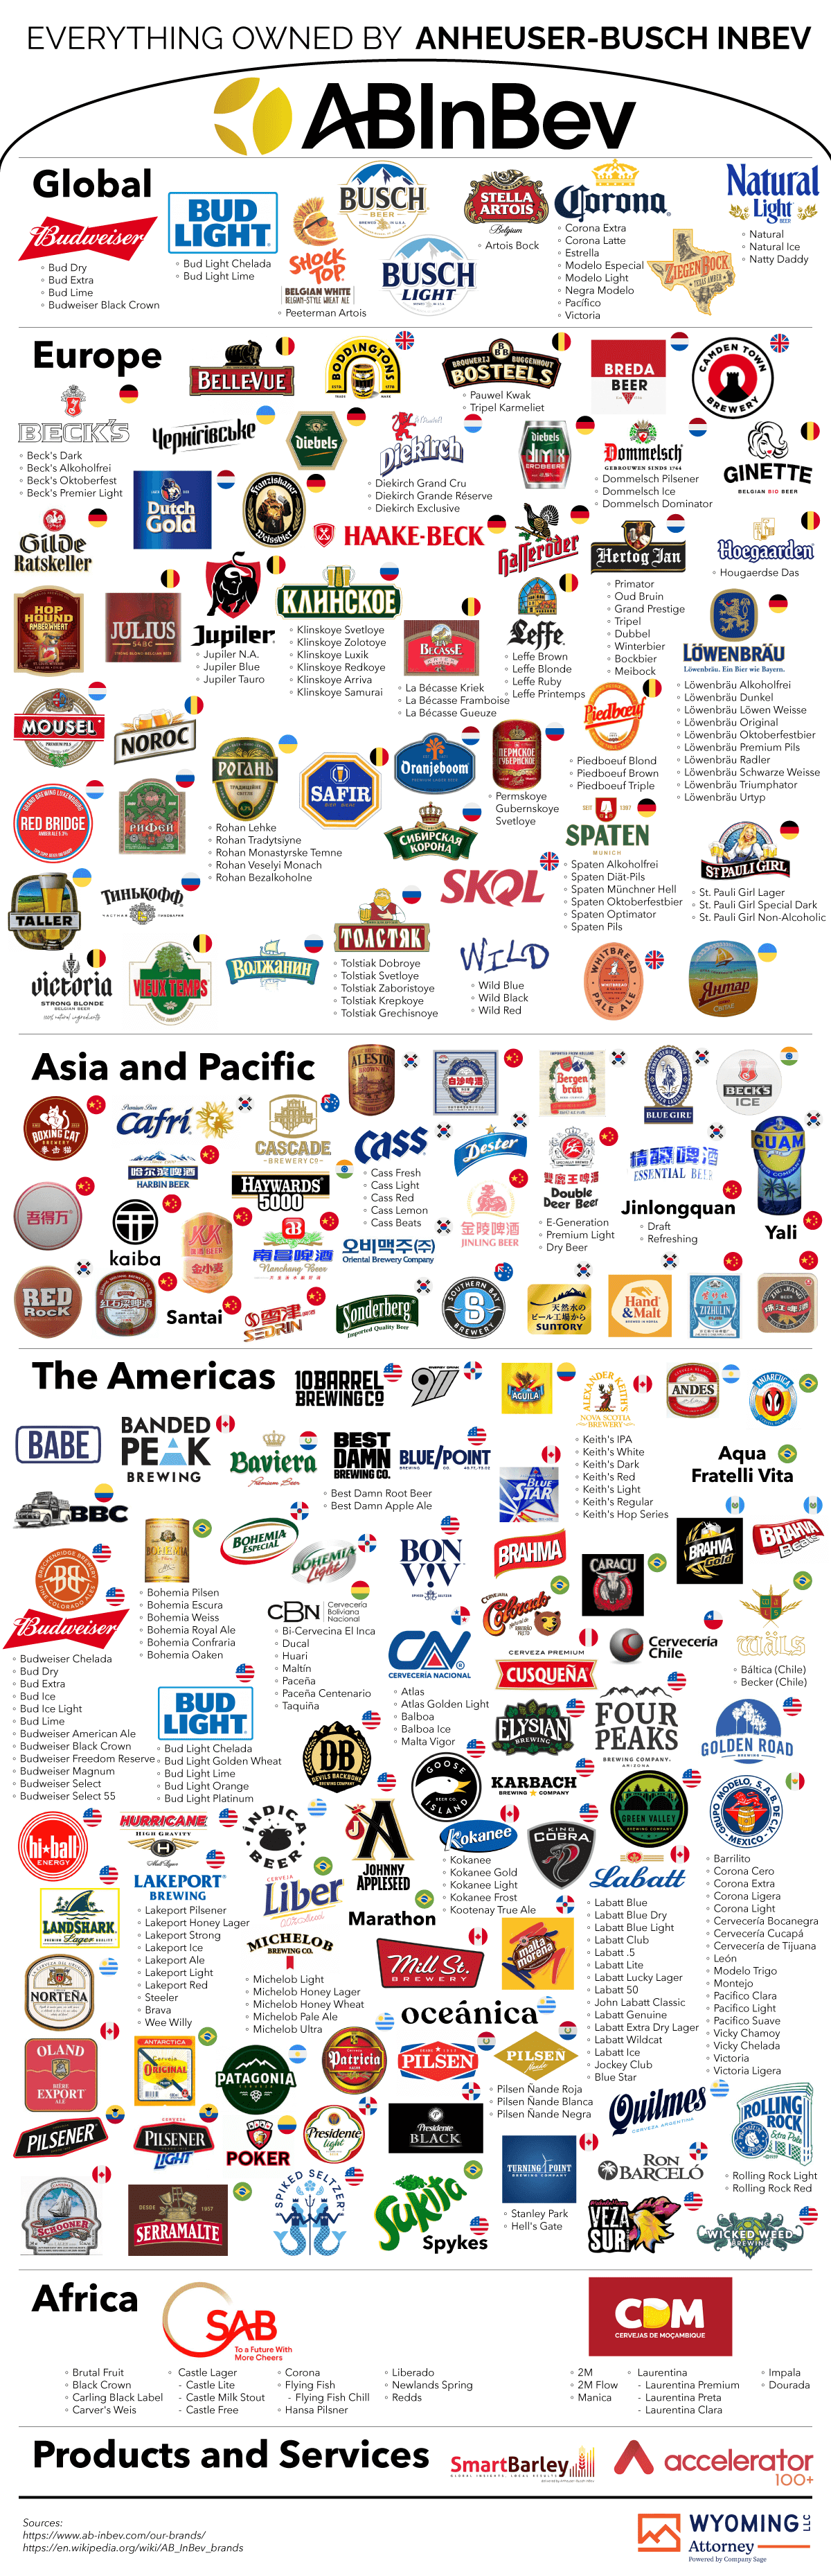 Everything Owned by Anheuser-Busch InBev - WyomingLLCAttorney.com - Infographic